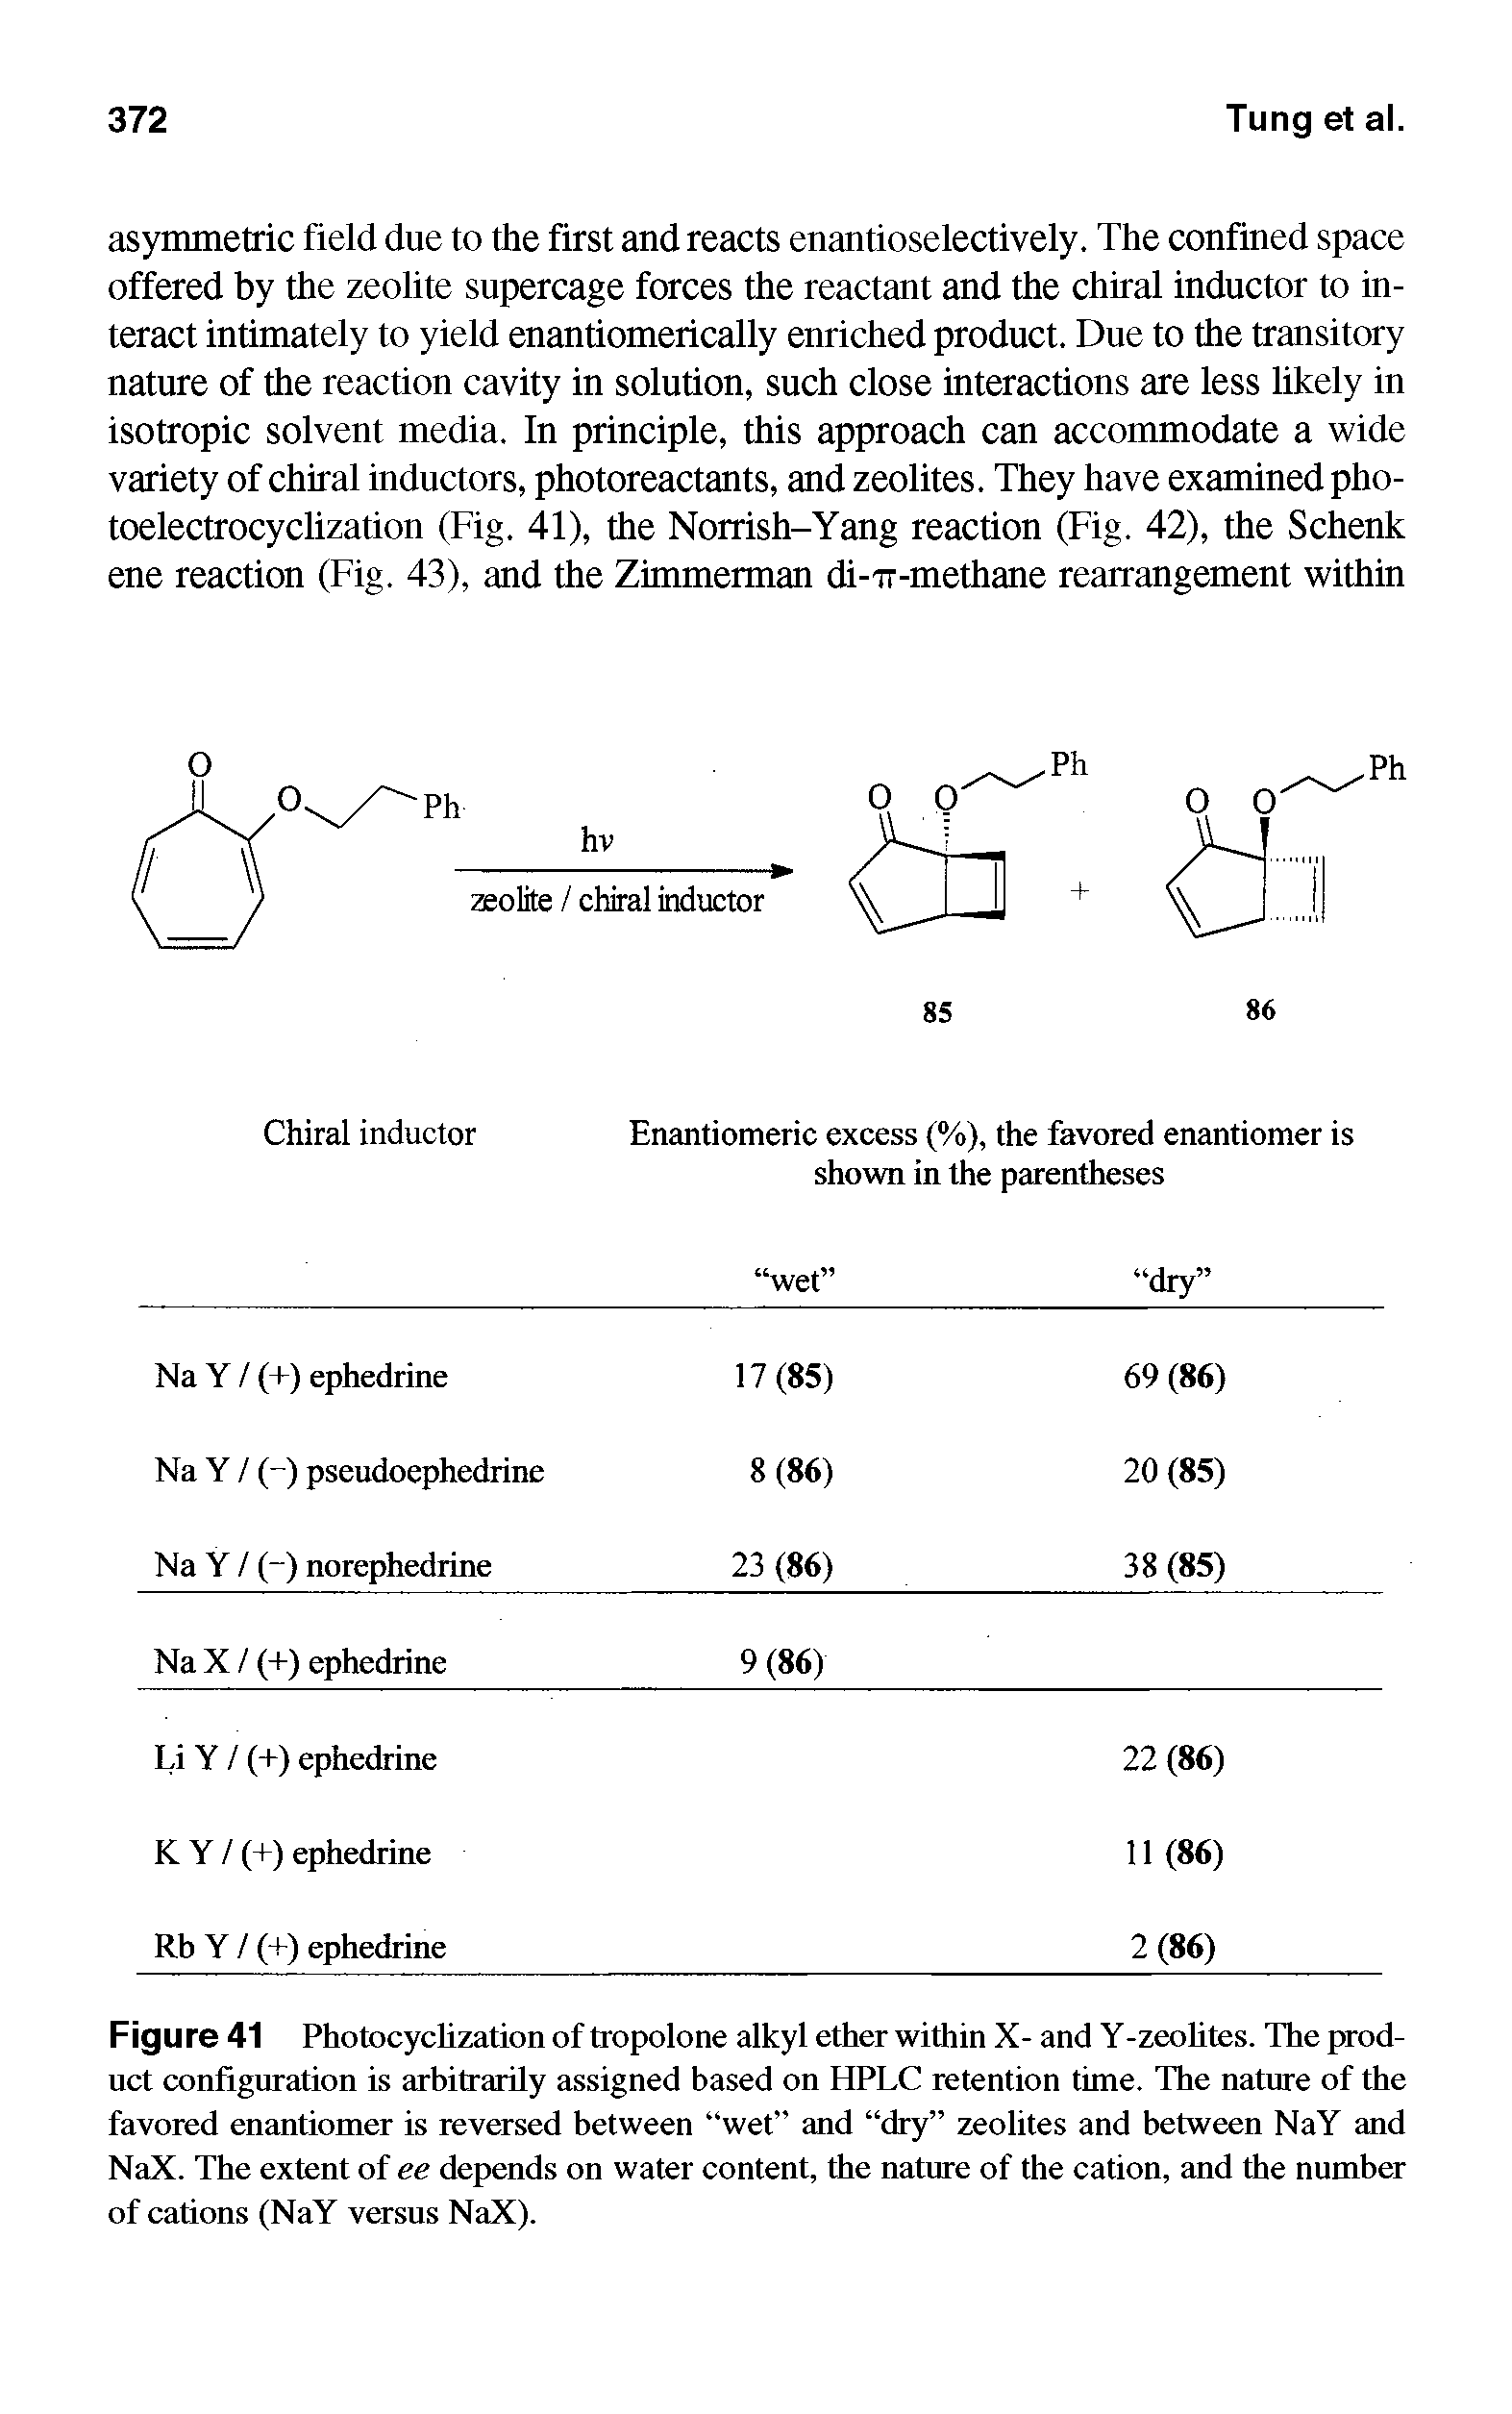 Figure 41 Photocyclization of tropolone alkyl ether within X- and Y-zeolites. The product configuration is arbitrarily assigned based on HPLC retention time. The nature of the favored enantiomer is reversed between wet and dry zeolites and between NaY and NaX. The extent of ee depends on water content, the nature of the cation, and the number of cations (NaY versus NaX).